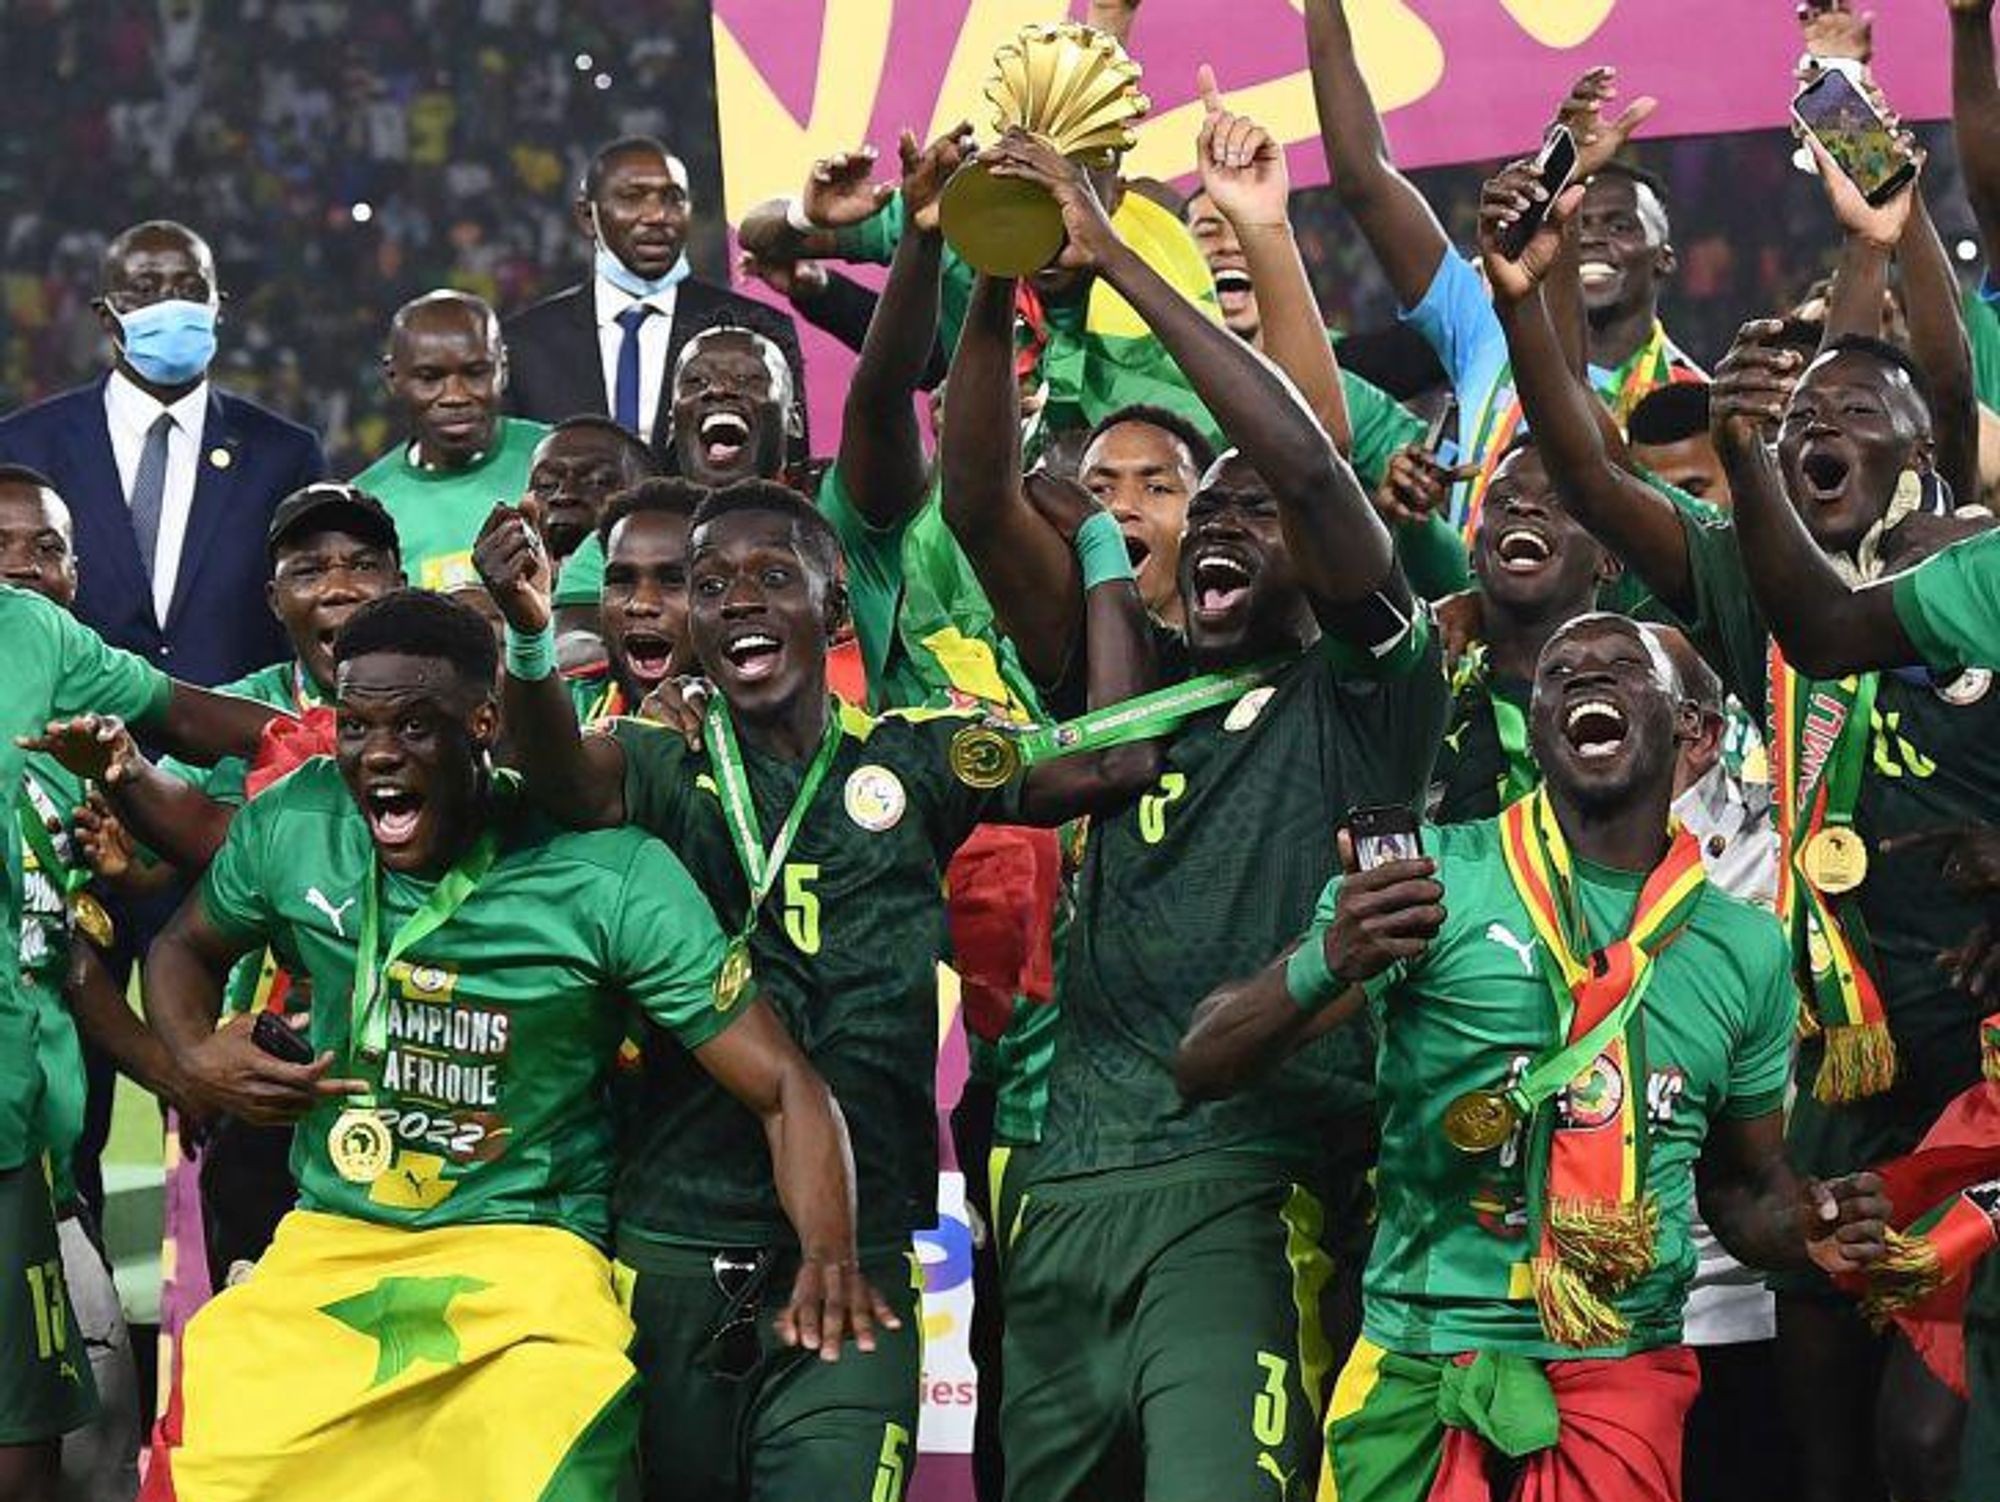 Watch As Crowds Celebrate Senegal's Historic AFCON 2021 Win - OkayAfrica